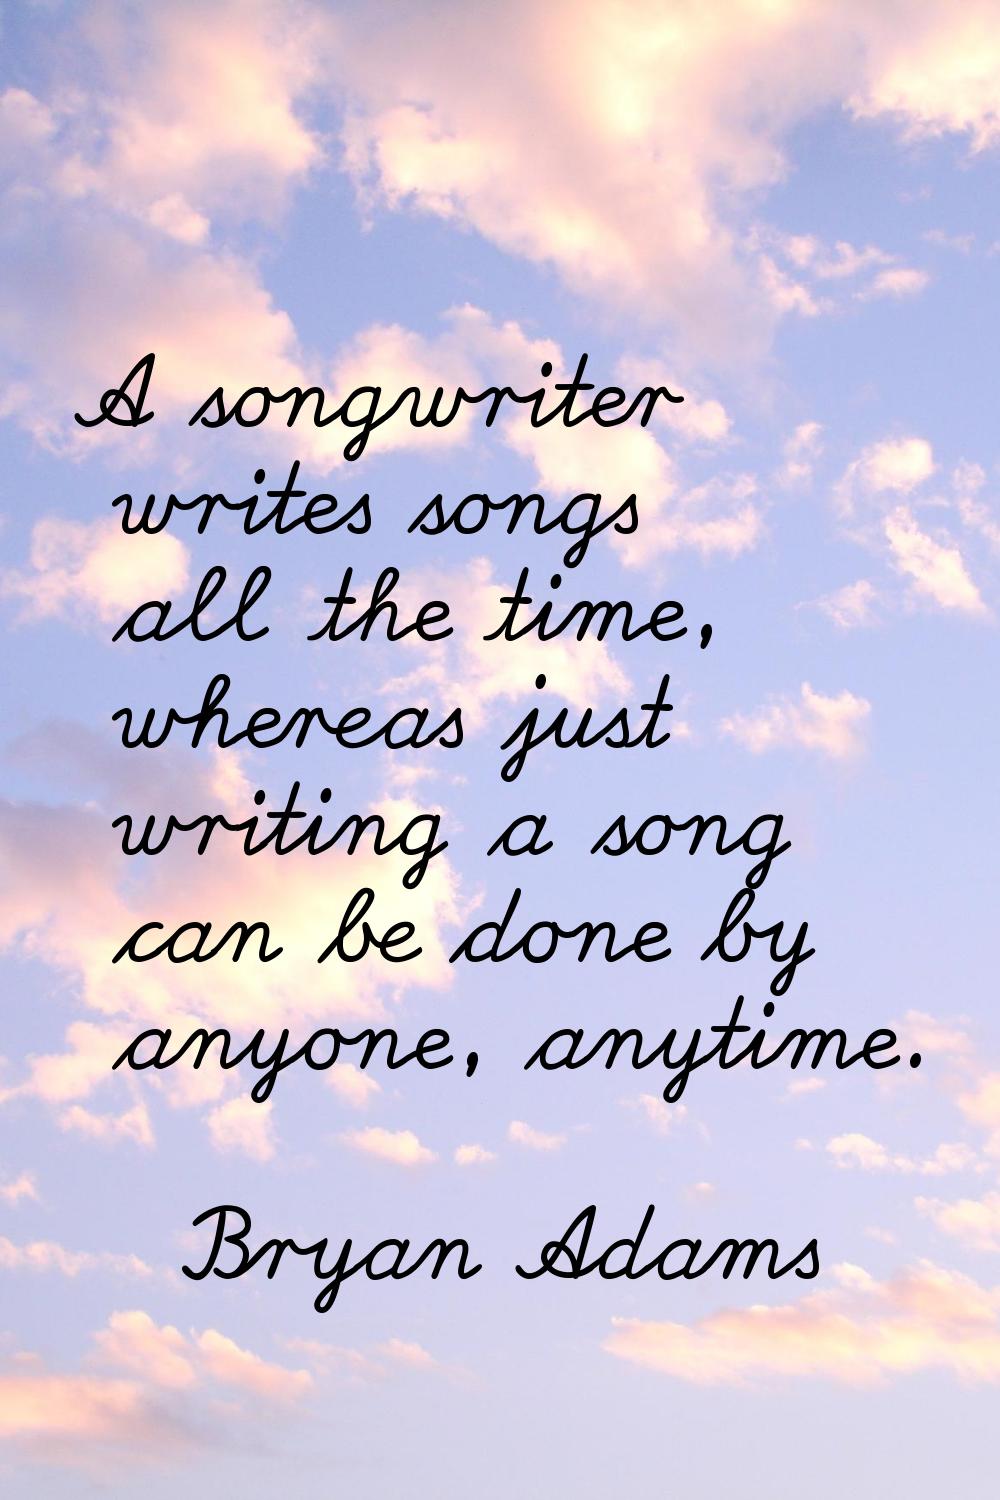 A songwriter writes songs all the time, whereas just writing a song can be done by anyone, anytime.